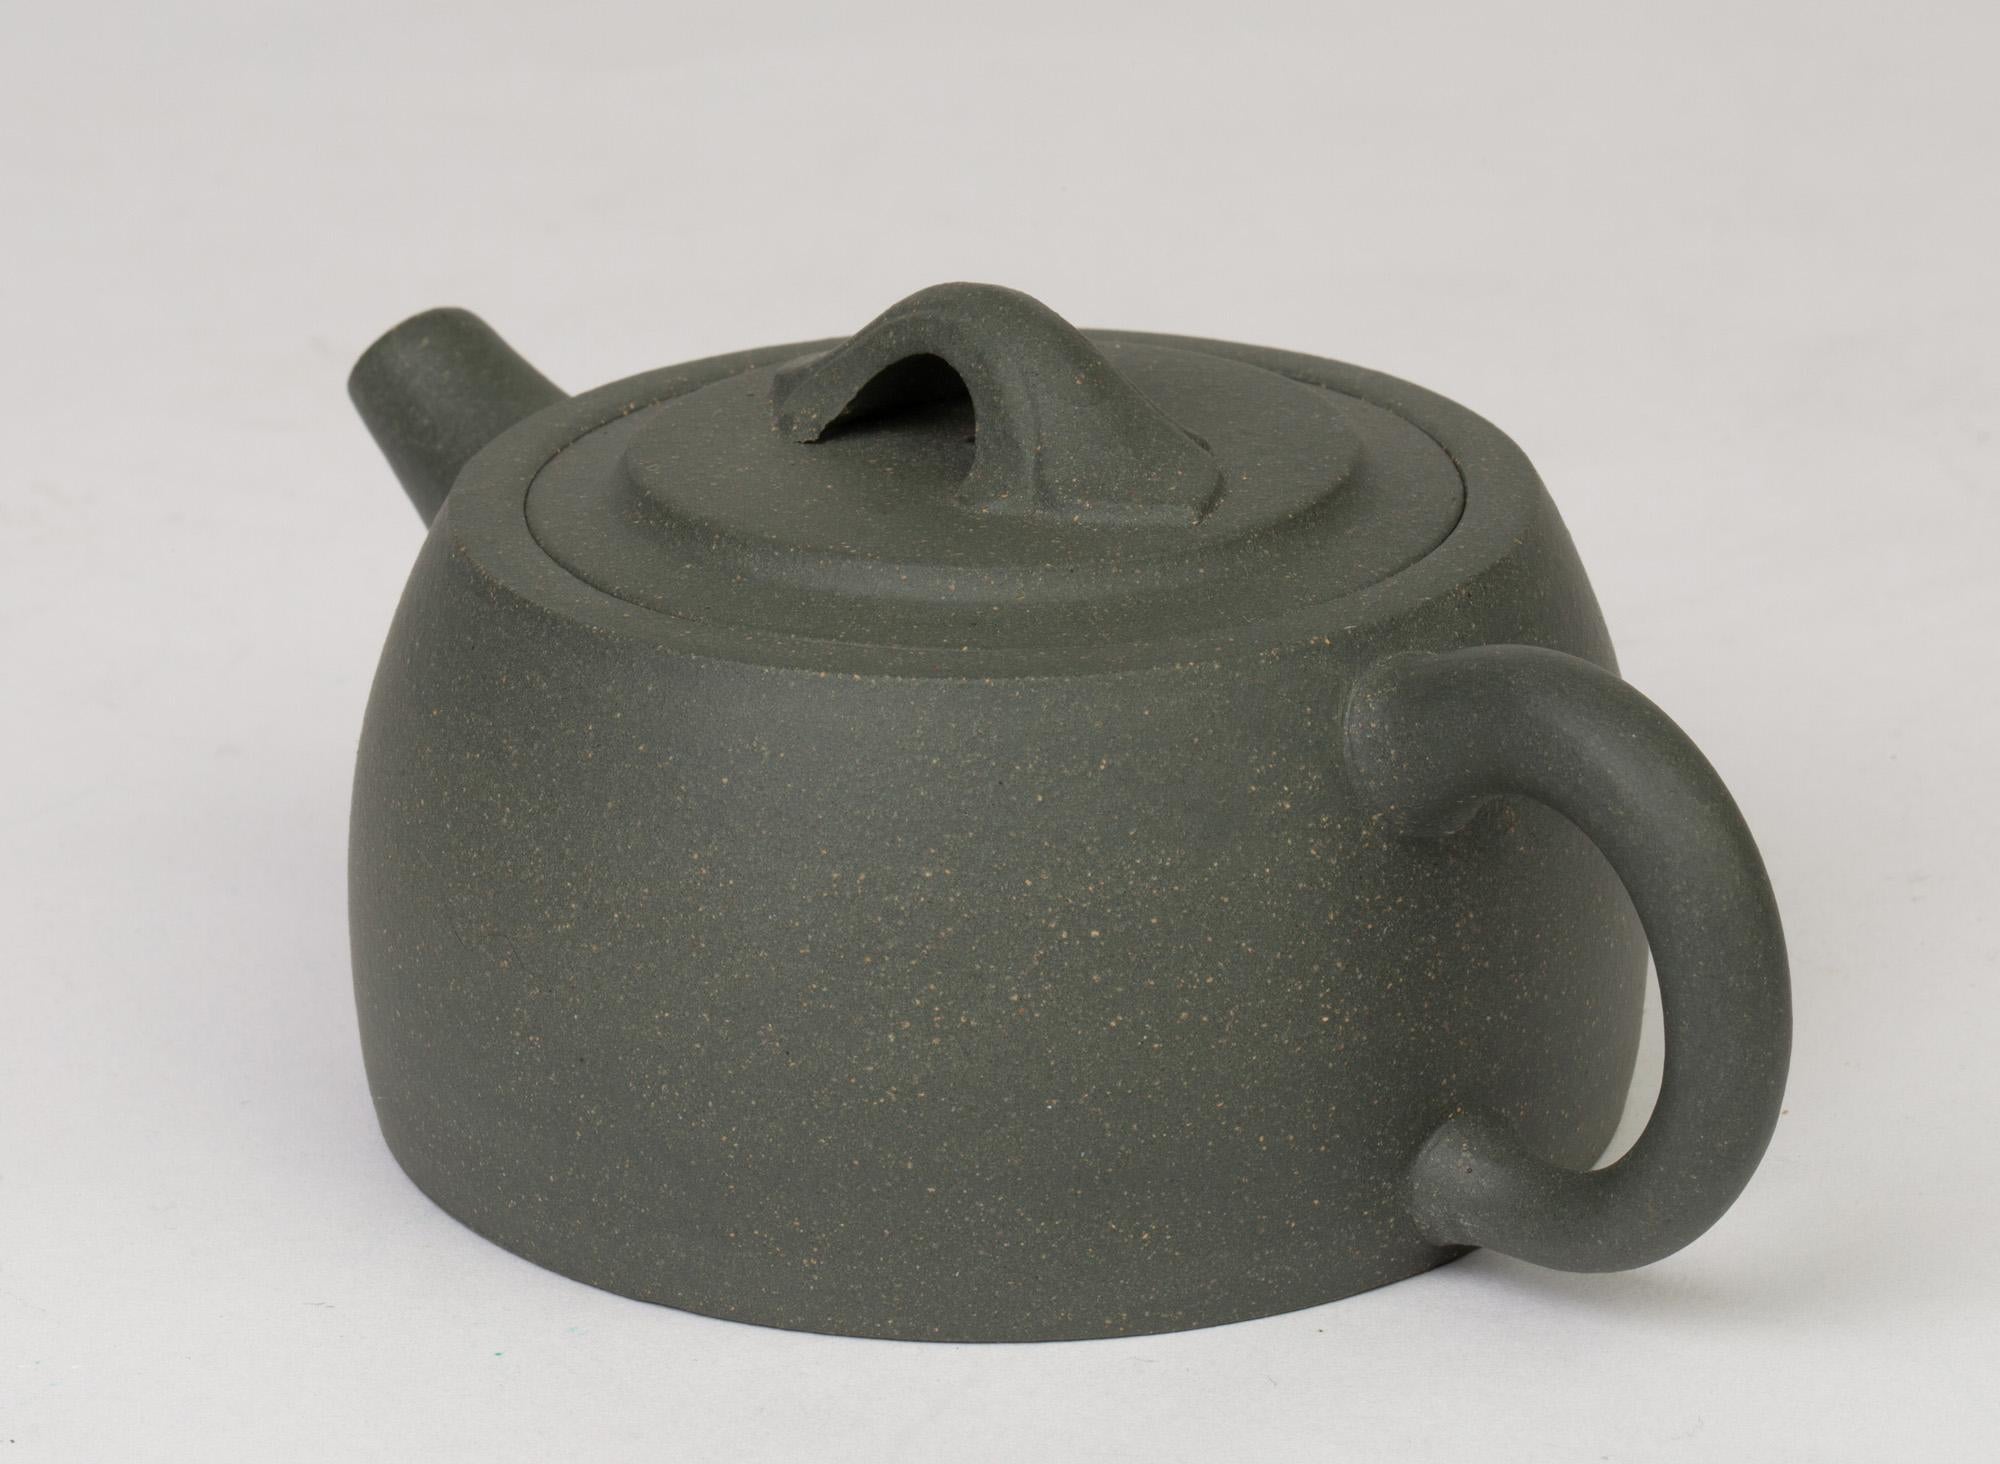 Modern Chinese Green Yixing Clay Squat Rounded Lidded Teapot with Certificate